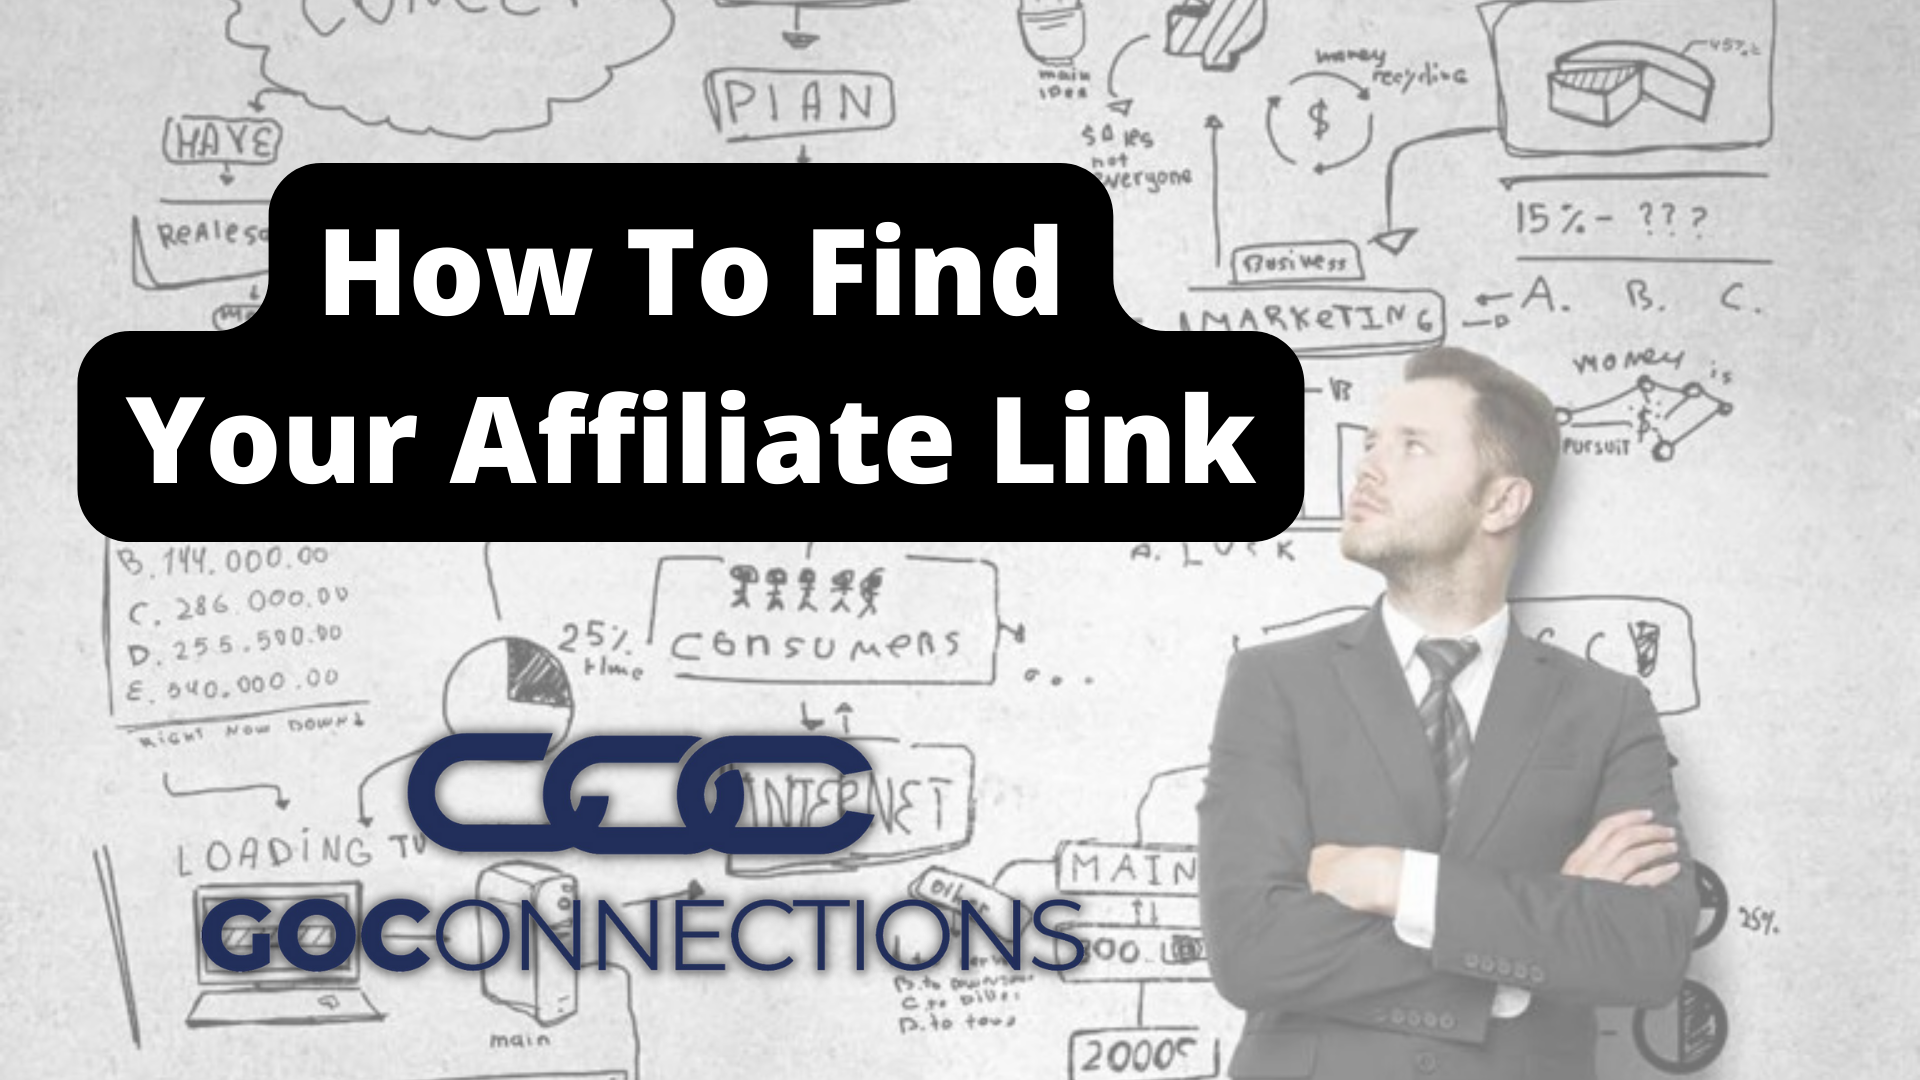 Go Connections How To Find Your Affiliate Link